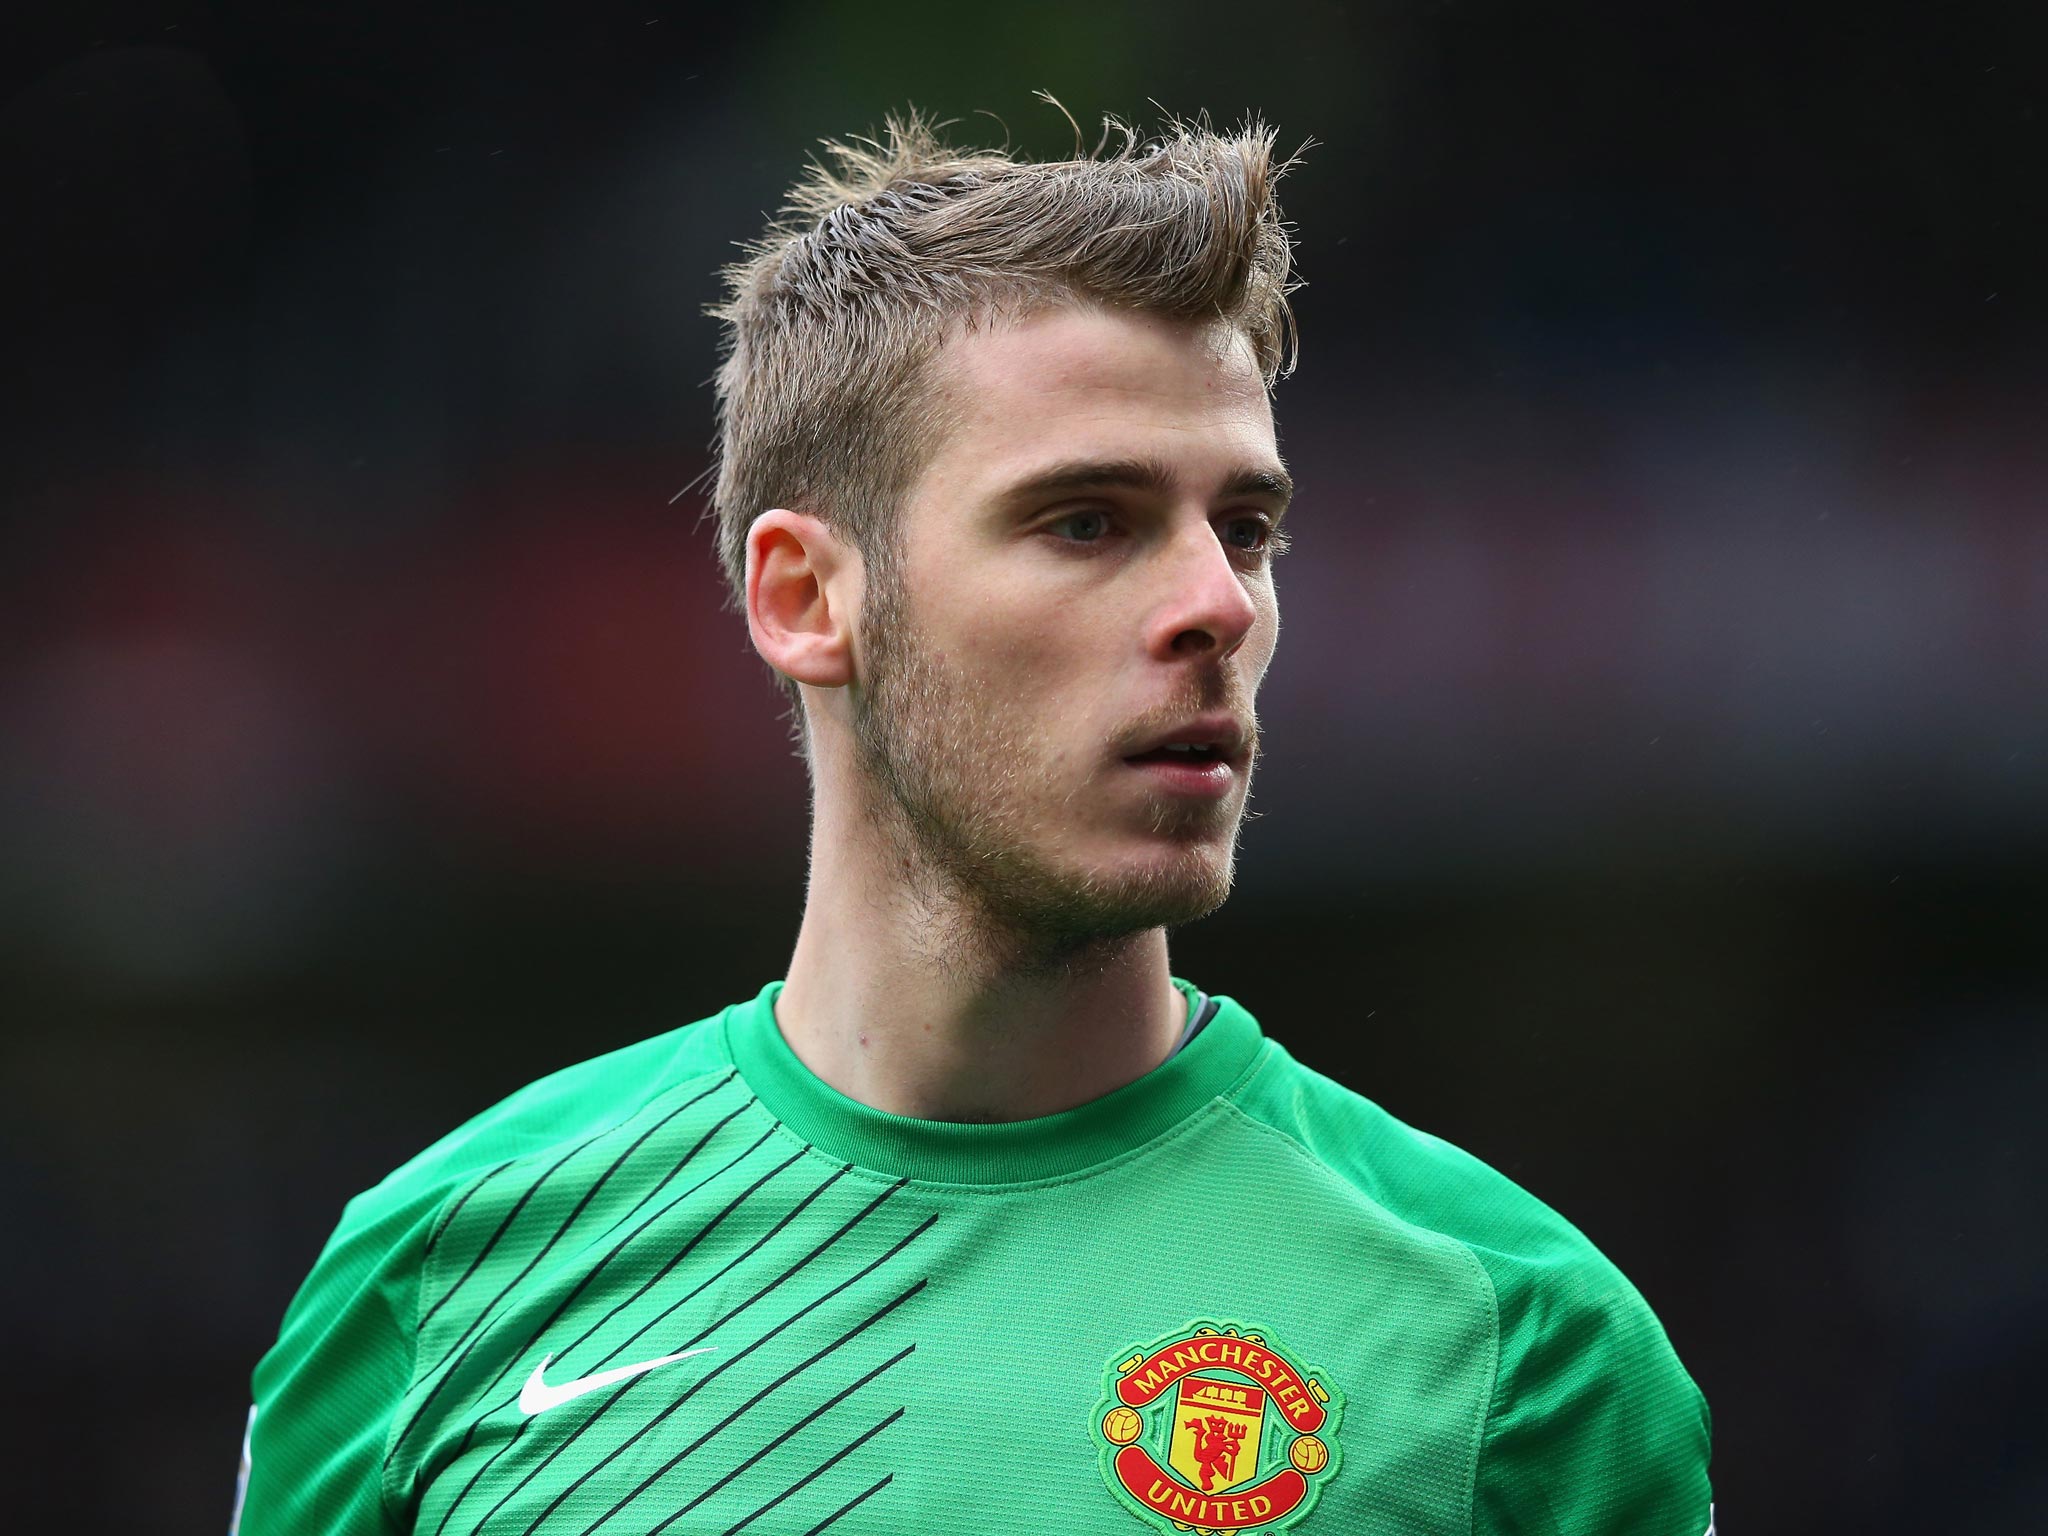 David de Gea cannot explain why Manchester United's form in the Champions League has been much better than the Premier League